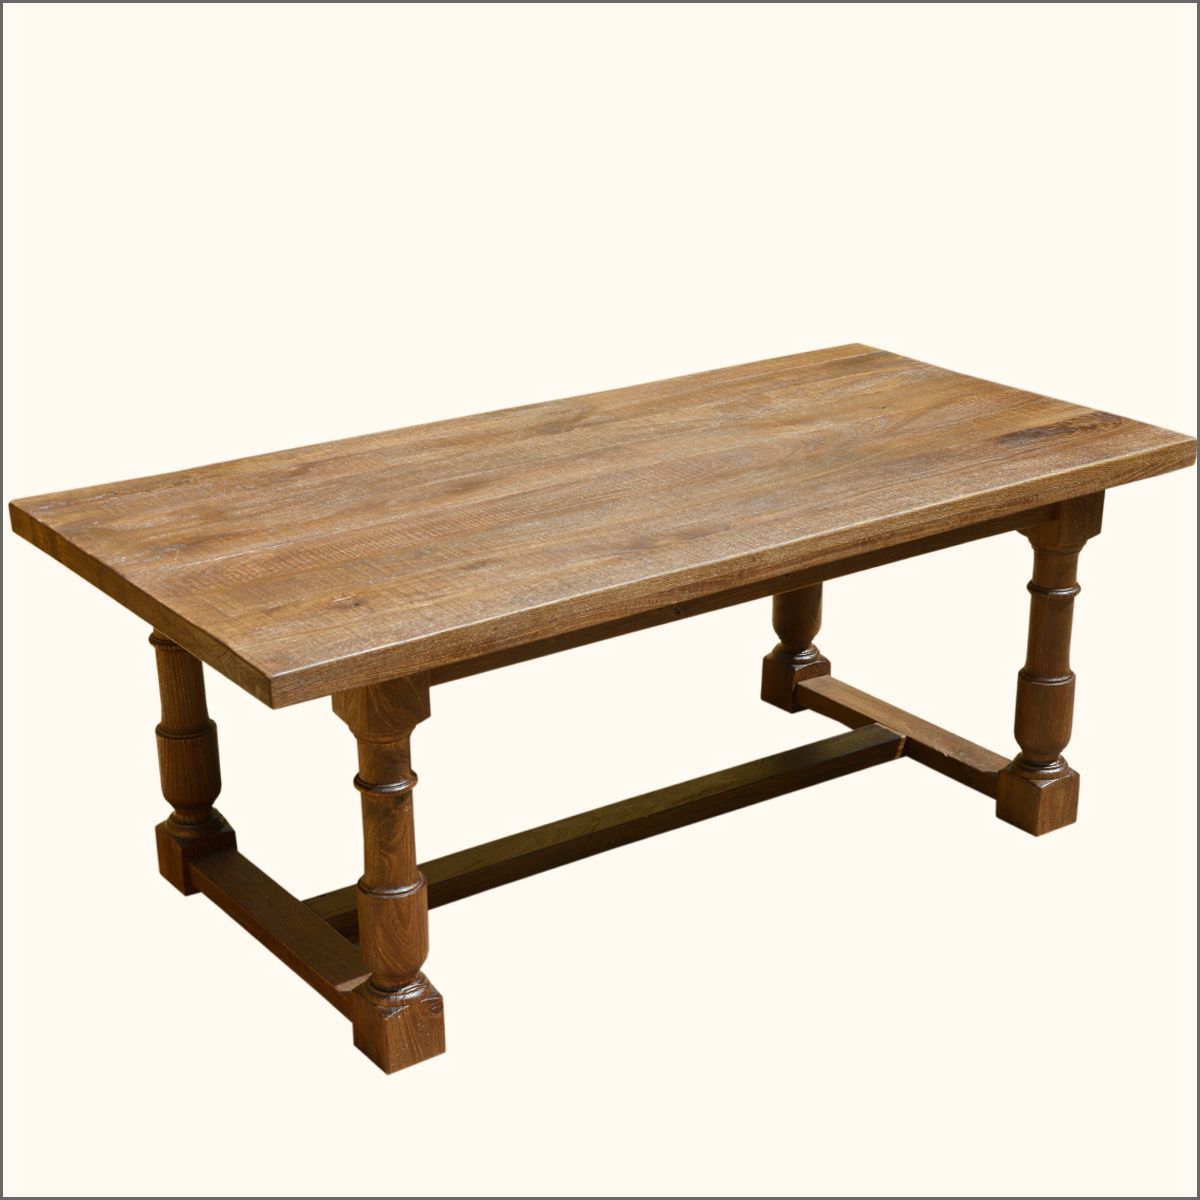 Large Solid Mango Wood Nelson 79" Dining Table With Turned Pertaining To Most Popular Carelton 36'' Mango Solid Wood Trestle Dining Tables (View 3 of 20)